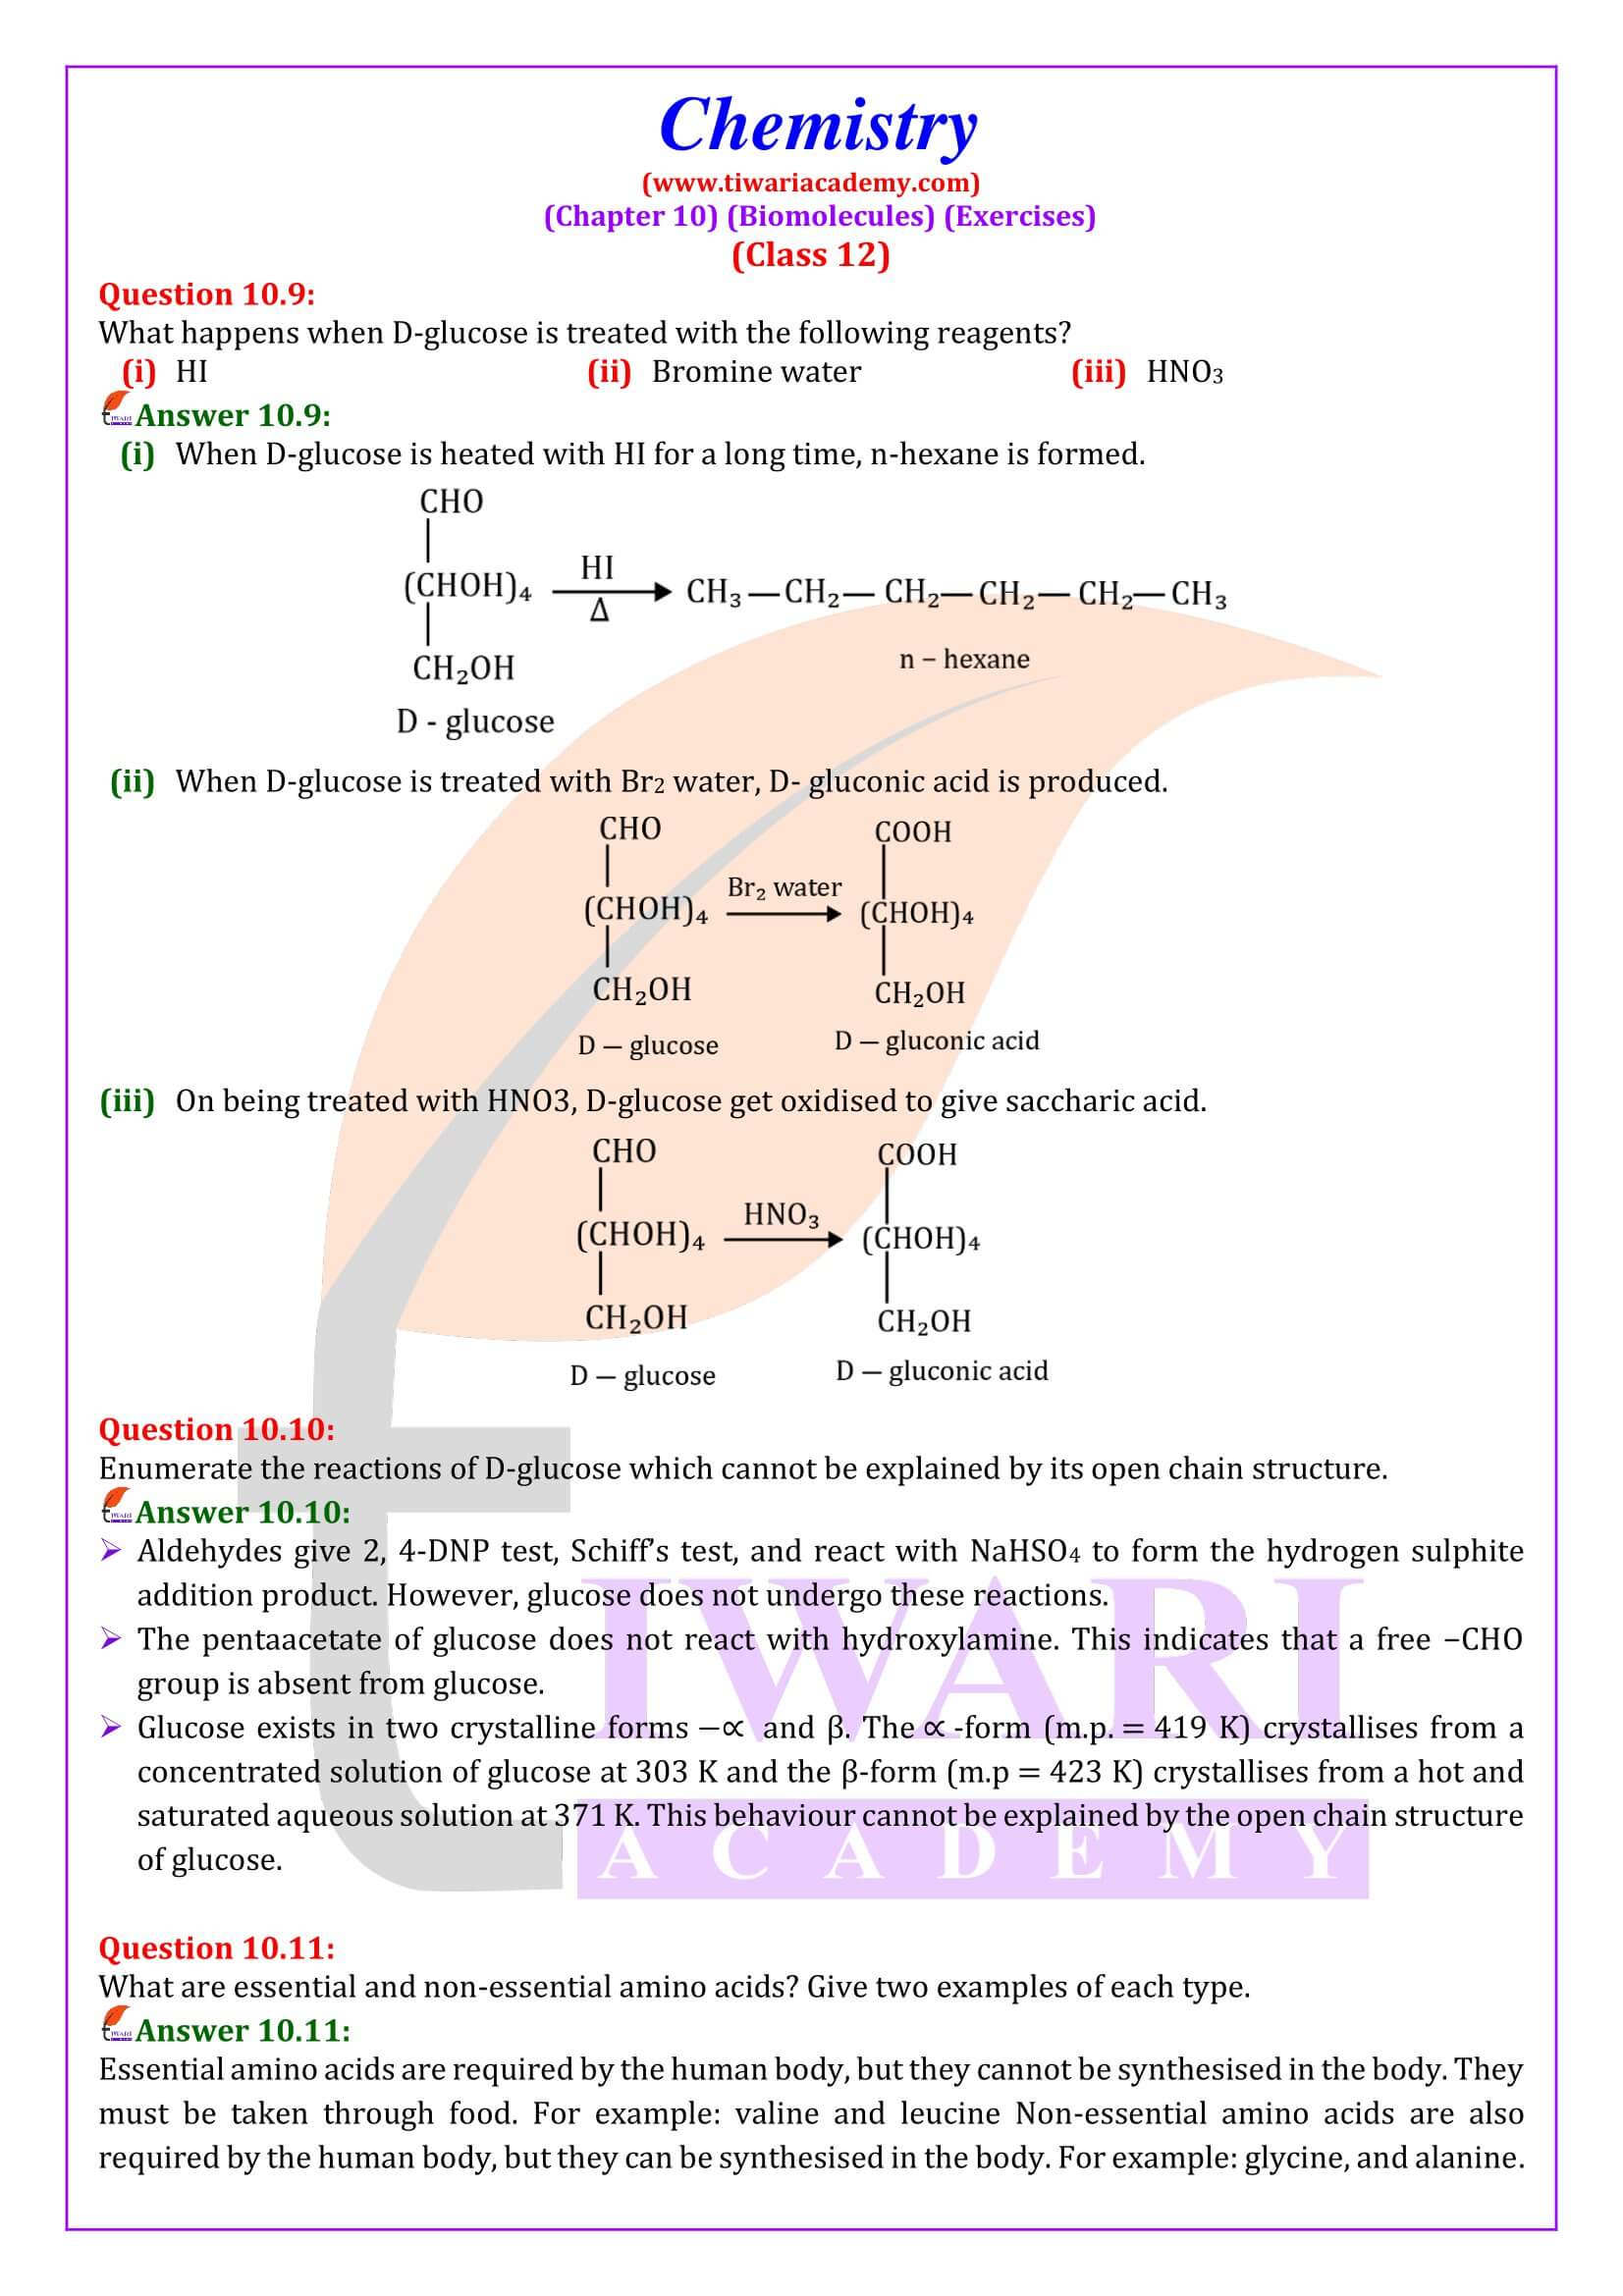 NCERT Solutions for Class 12 Chemistry Chapter 10 Exercises